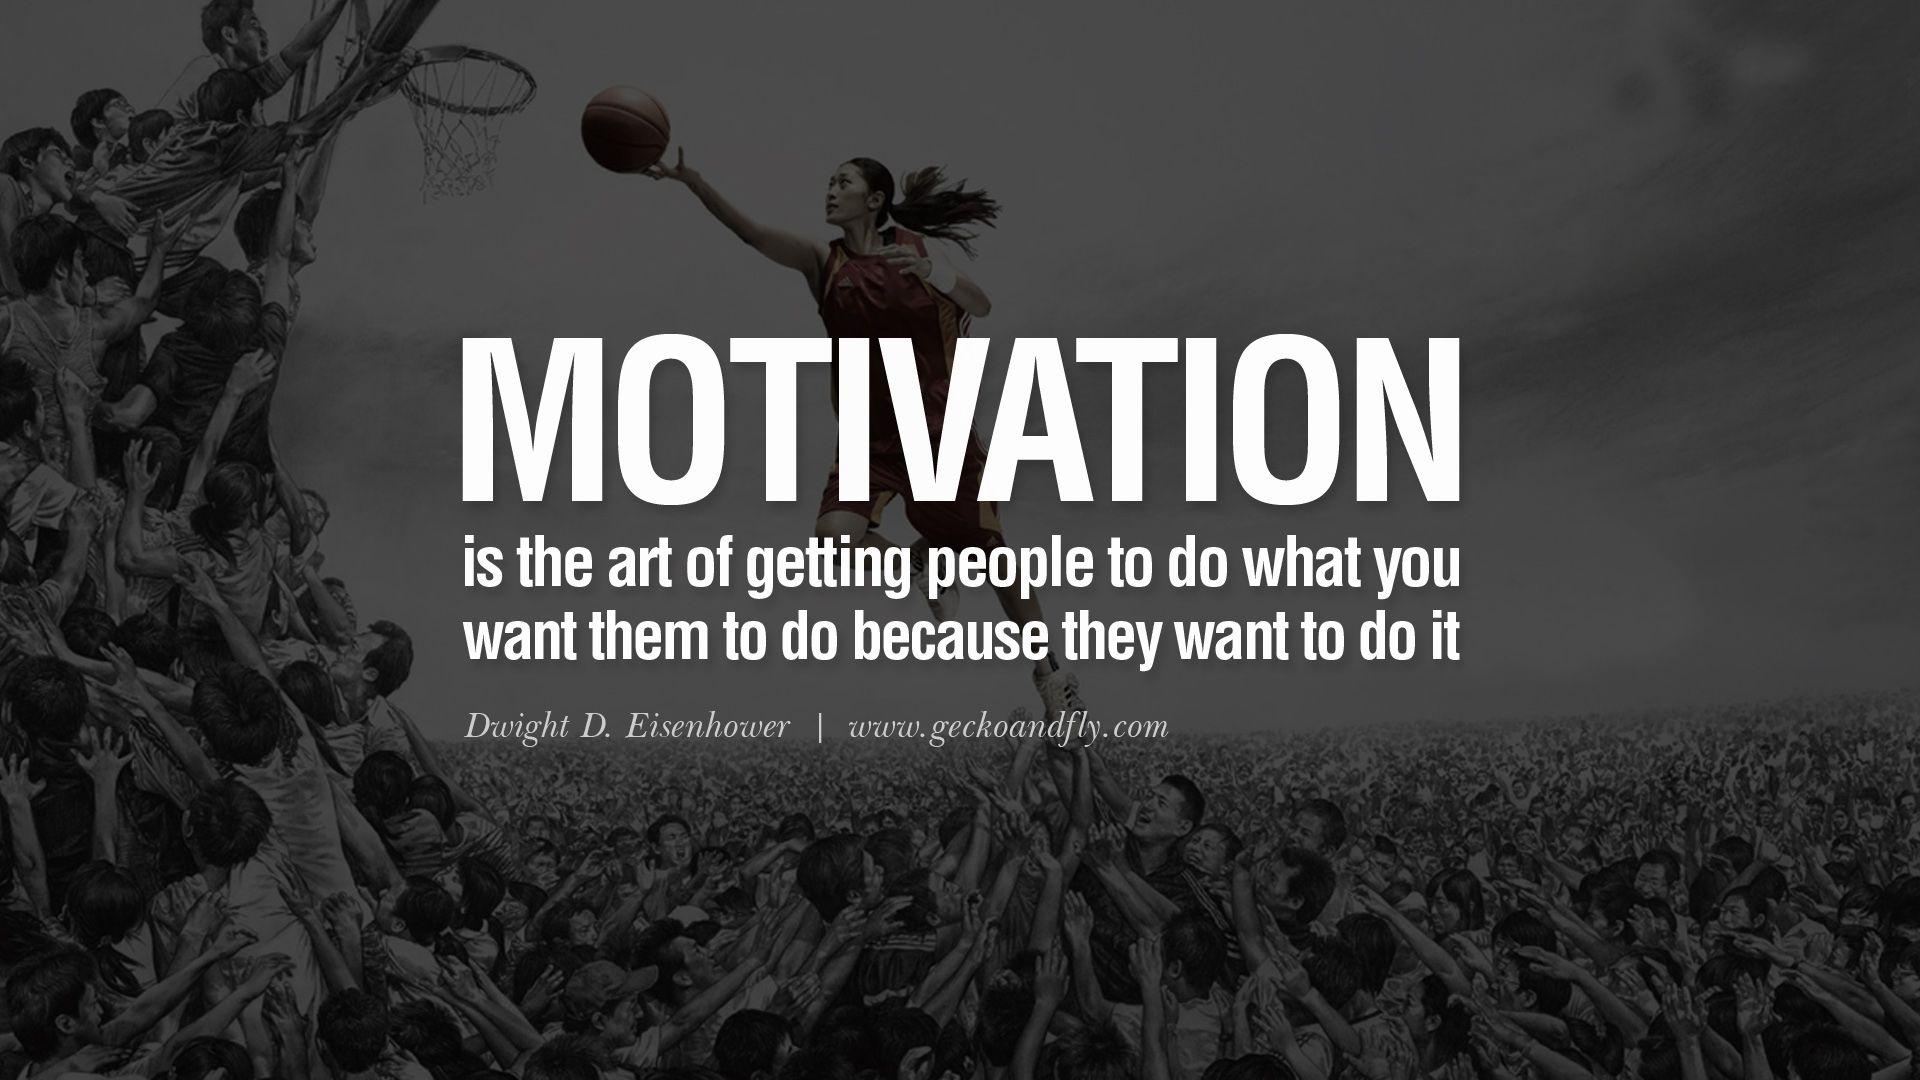 Encouraging and Motivational Poster Quotes on Sports and Life